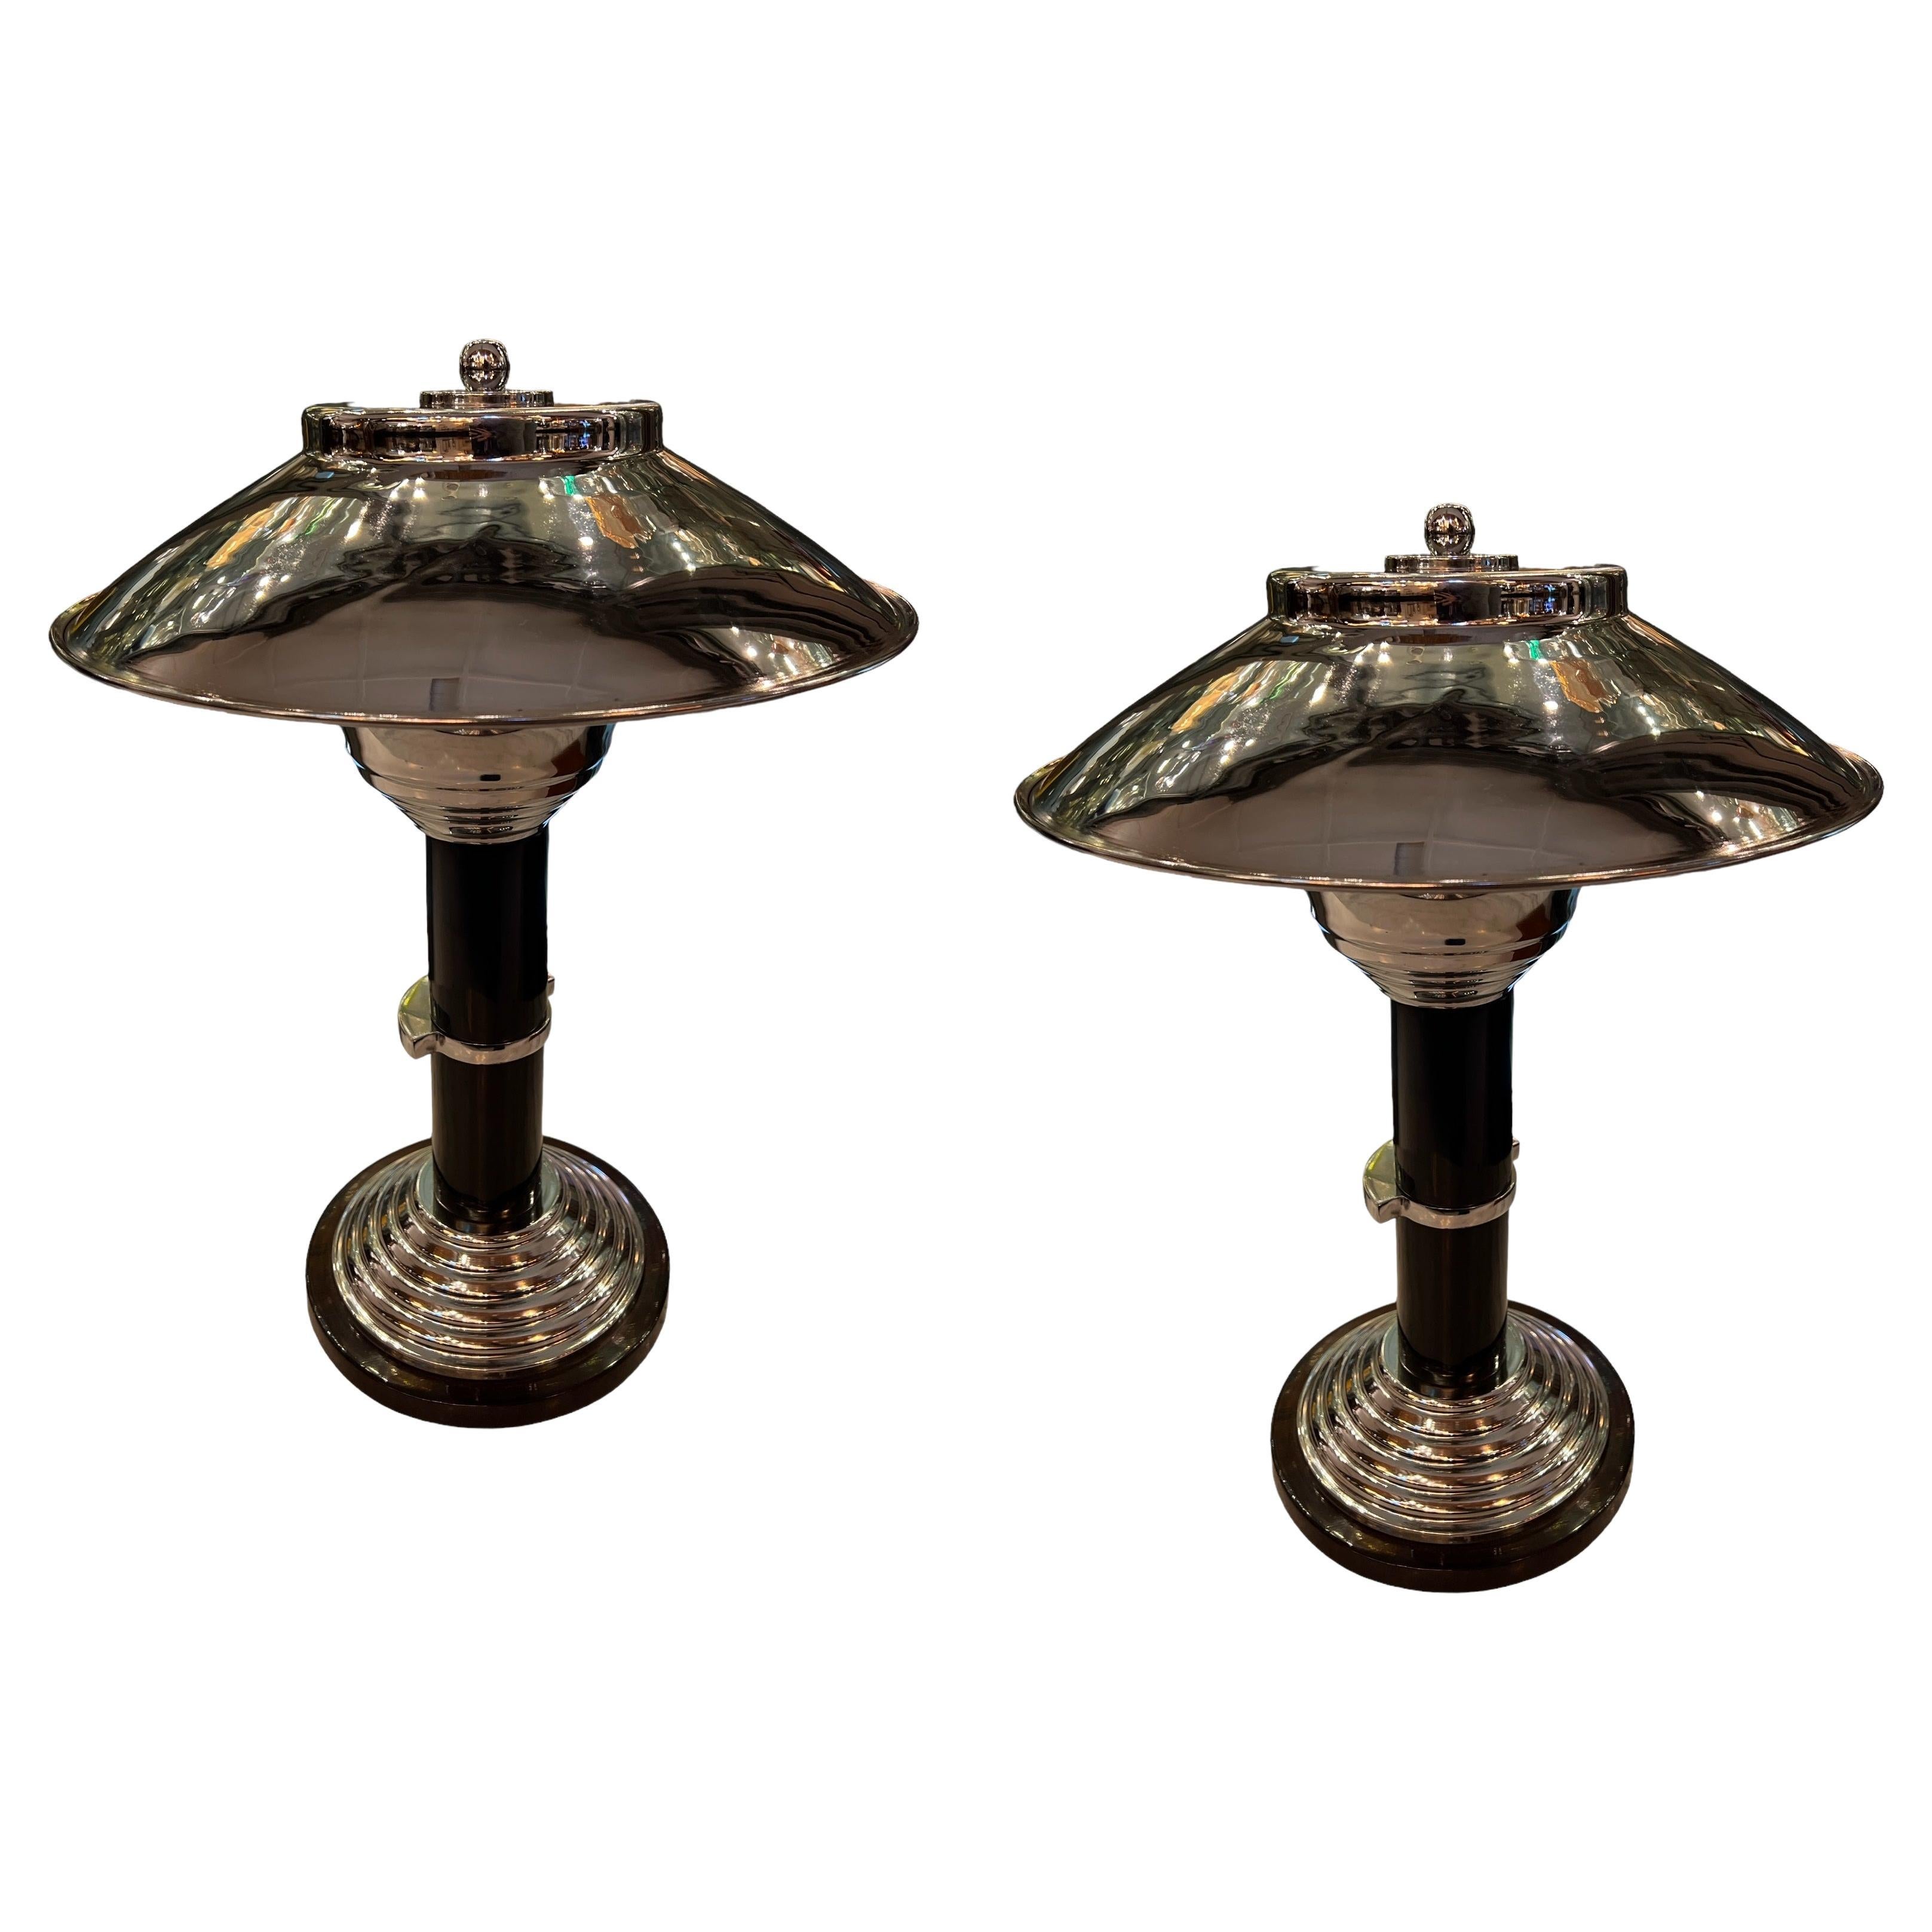 Pair of Art Deco Table Lamps in wood and chrome, France, 1930 For Sale